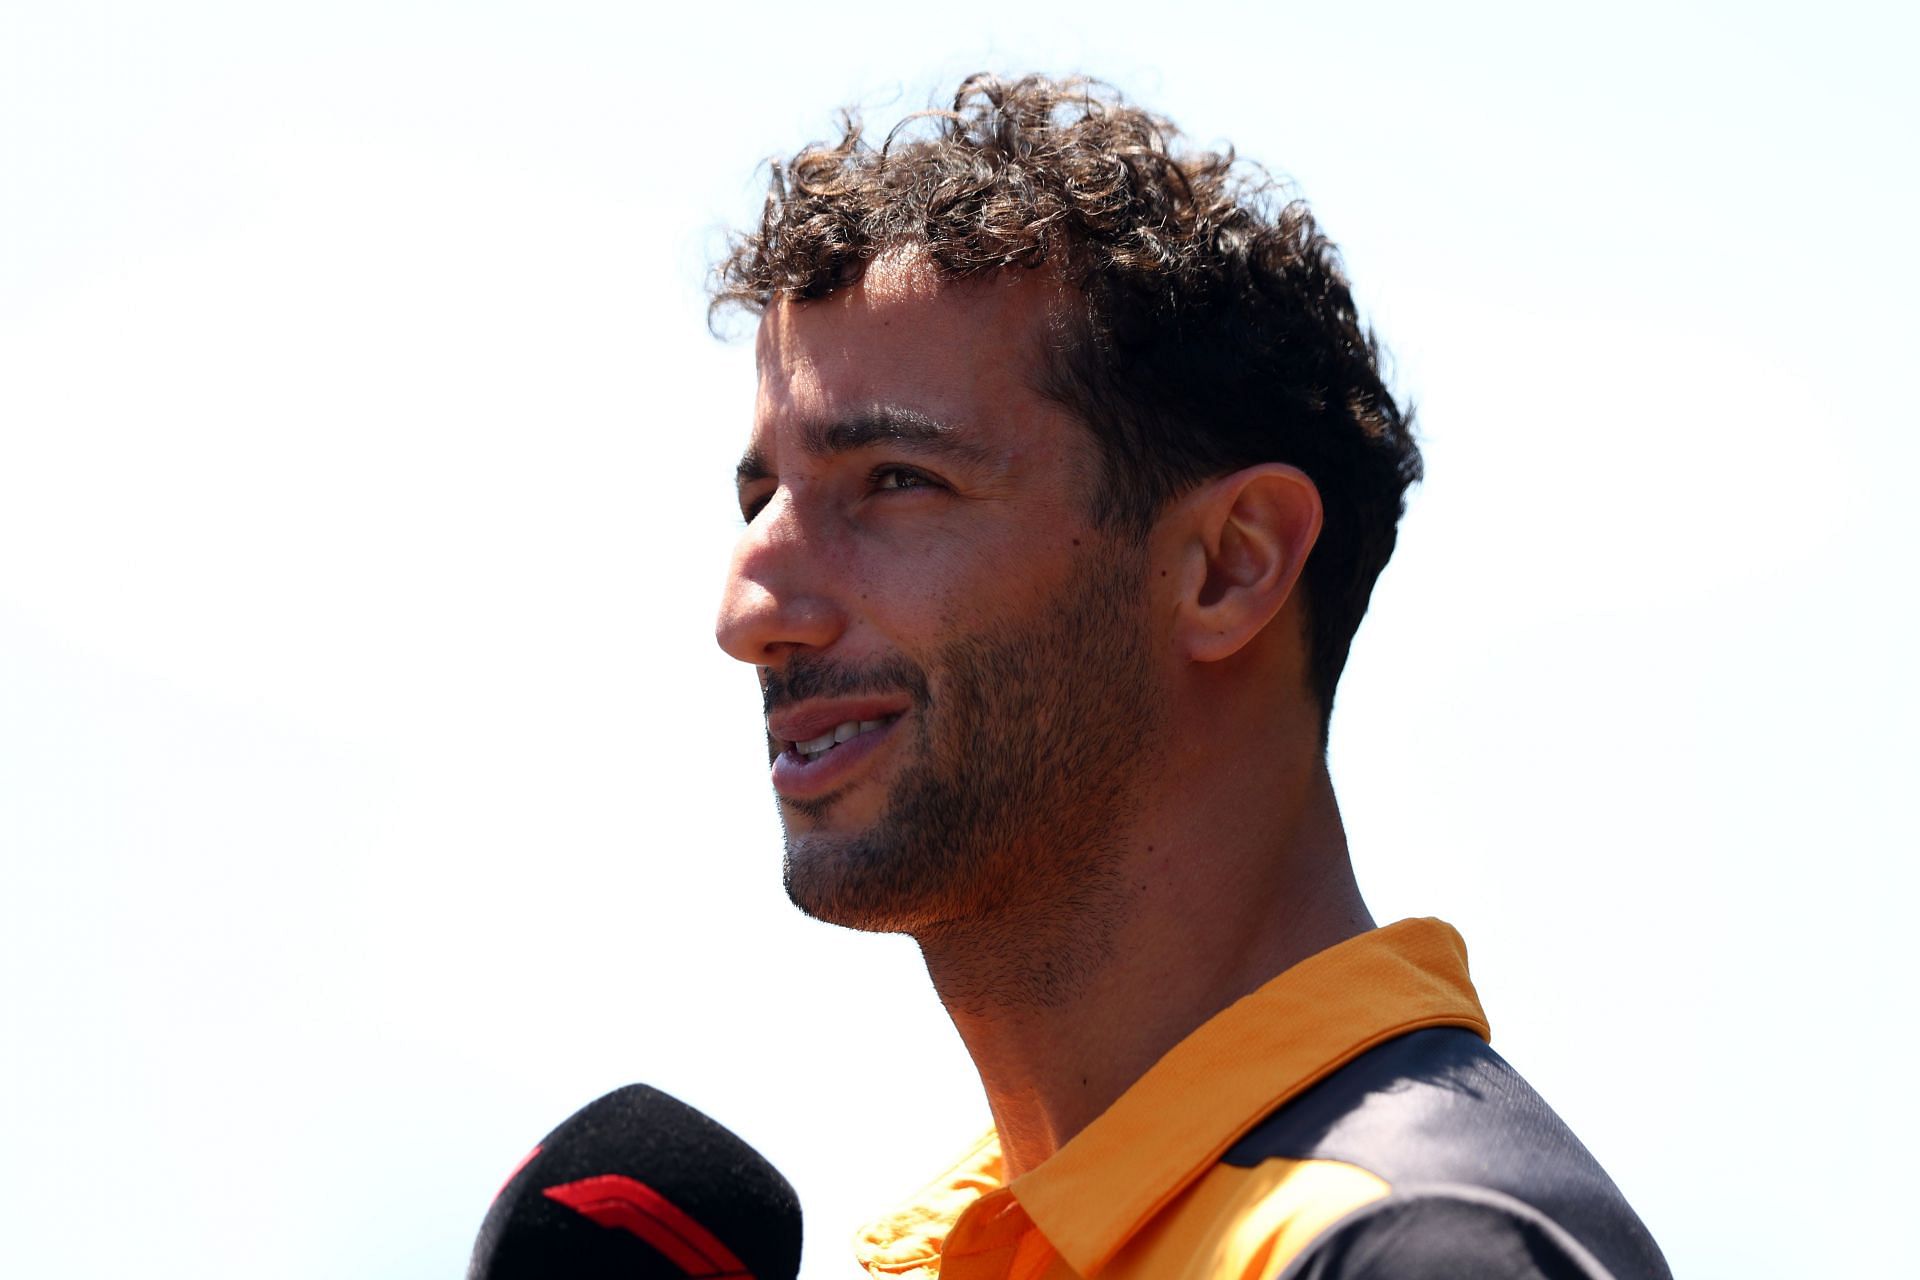 Daniel Ricciardo has aired his concerns over the long-term effects of porpoising